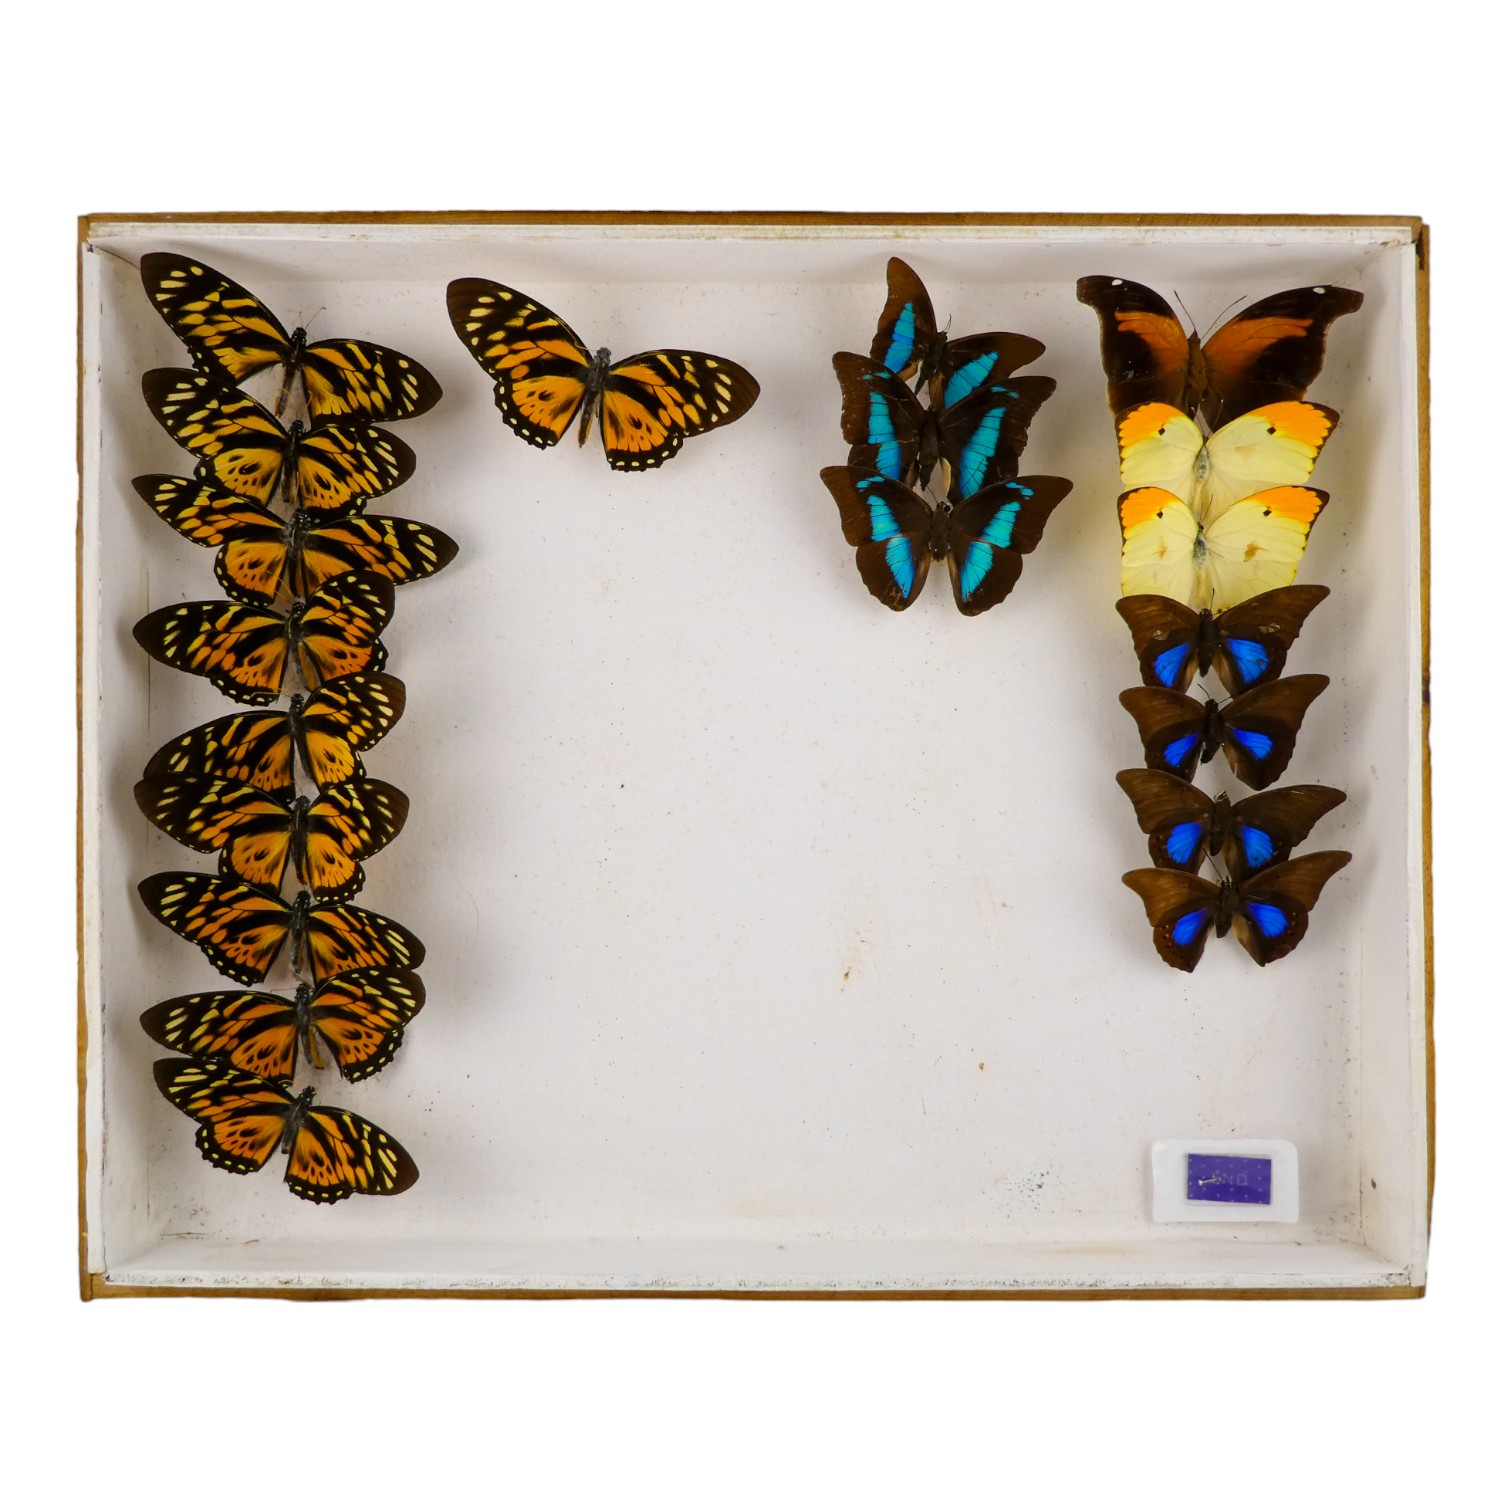 A case of butterflies in three rows - including Tiger Swallowtail, Shaded Blue Leafwing and Tritea